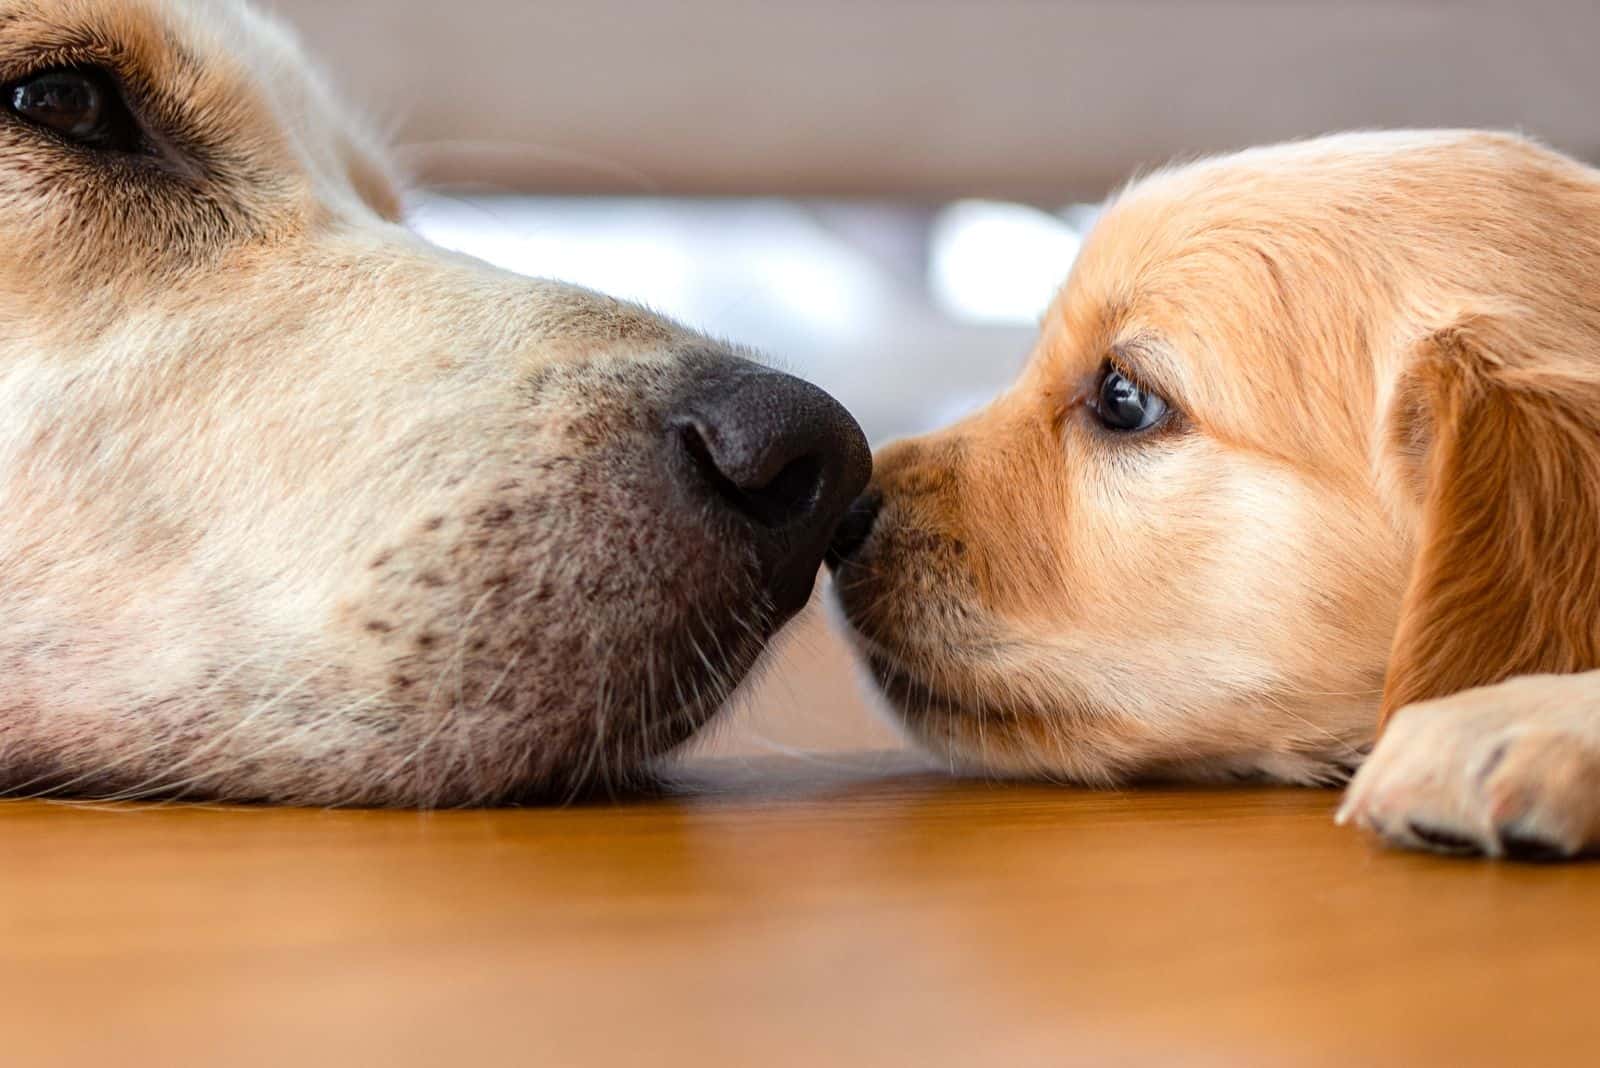 two dogs lie on the floor and touch each other with their snouts